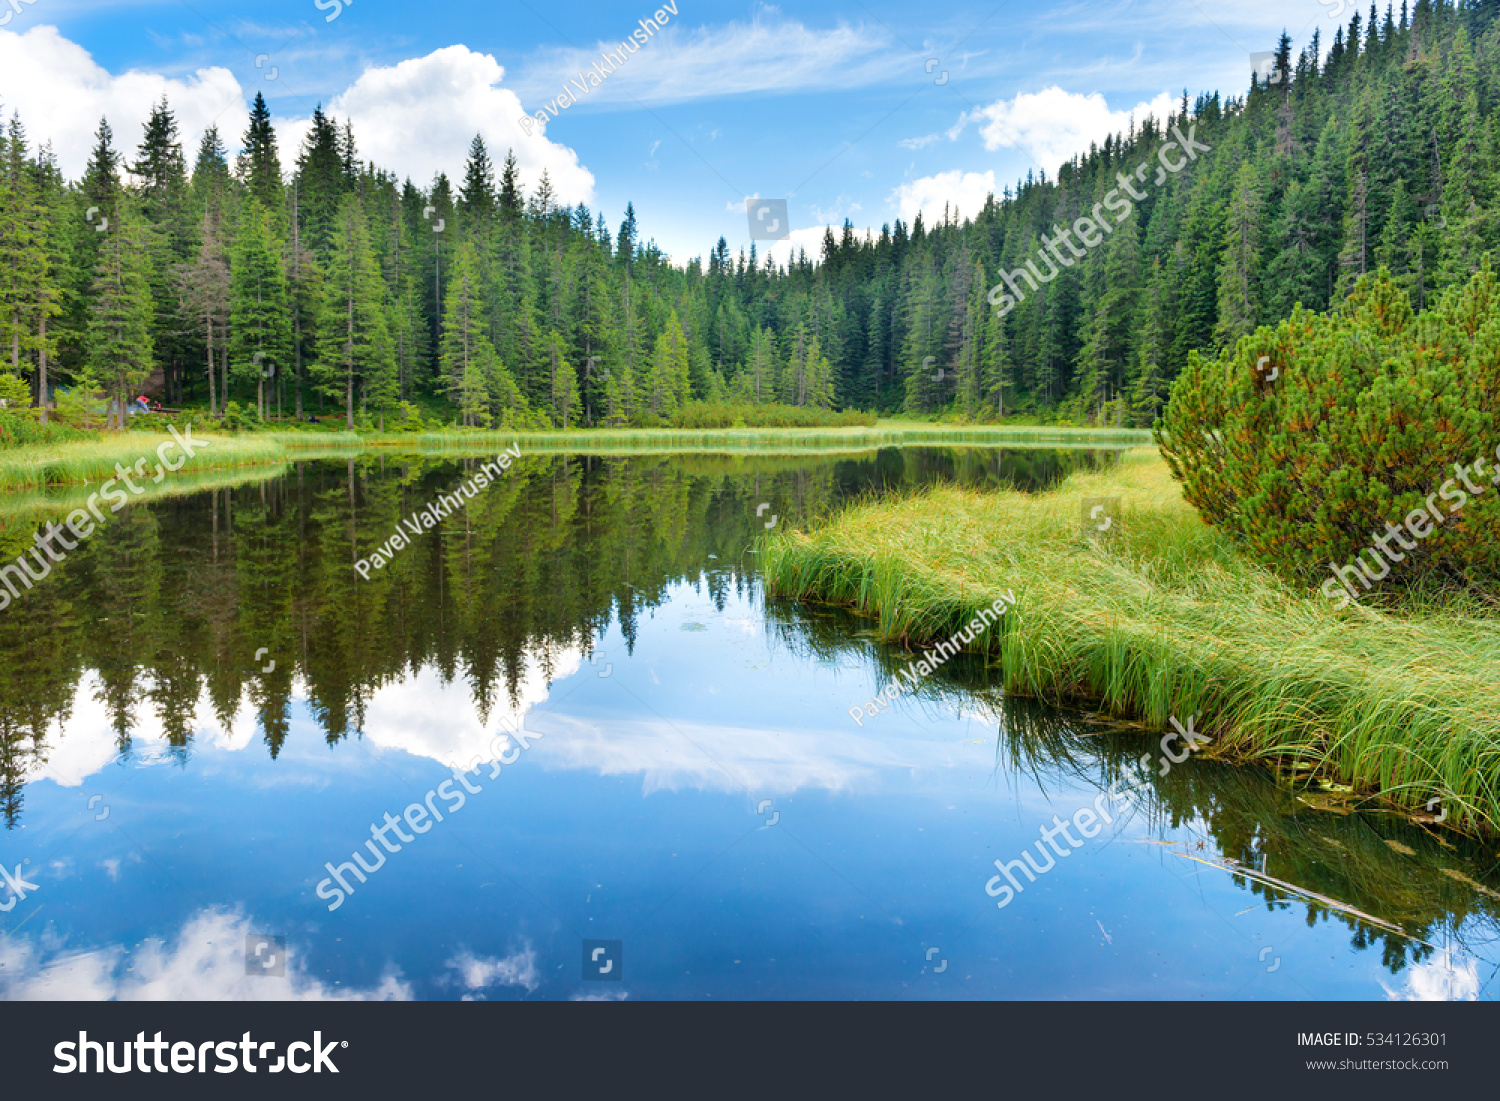 Blue water in a forest lake with pine trees #534126301